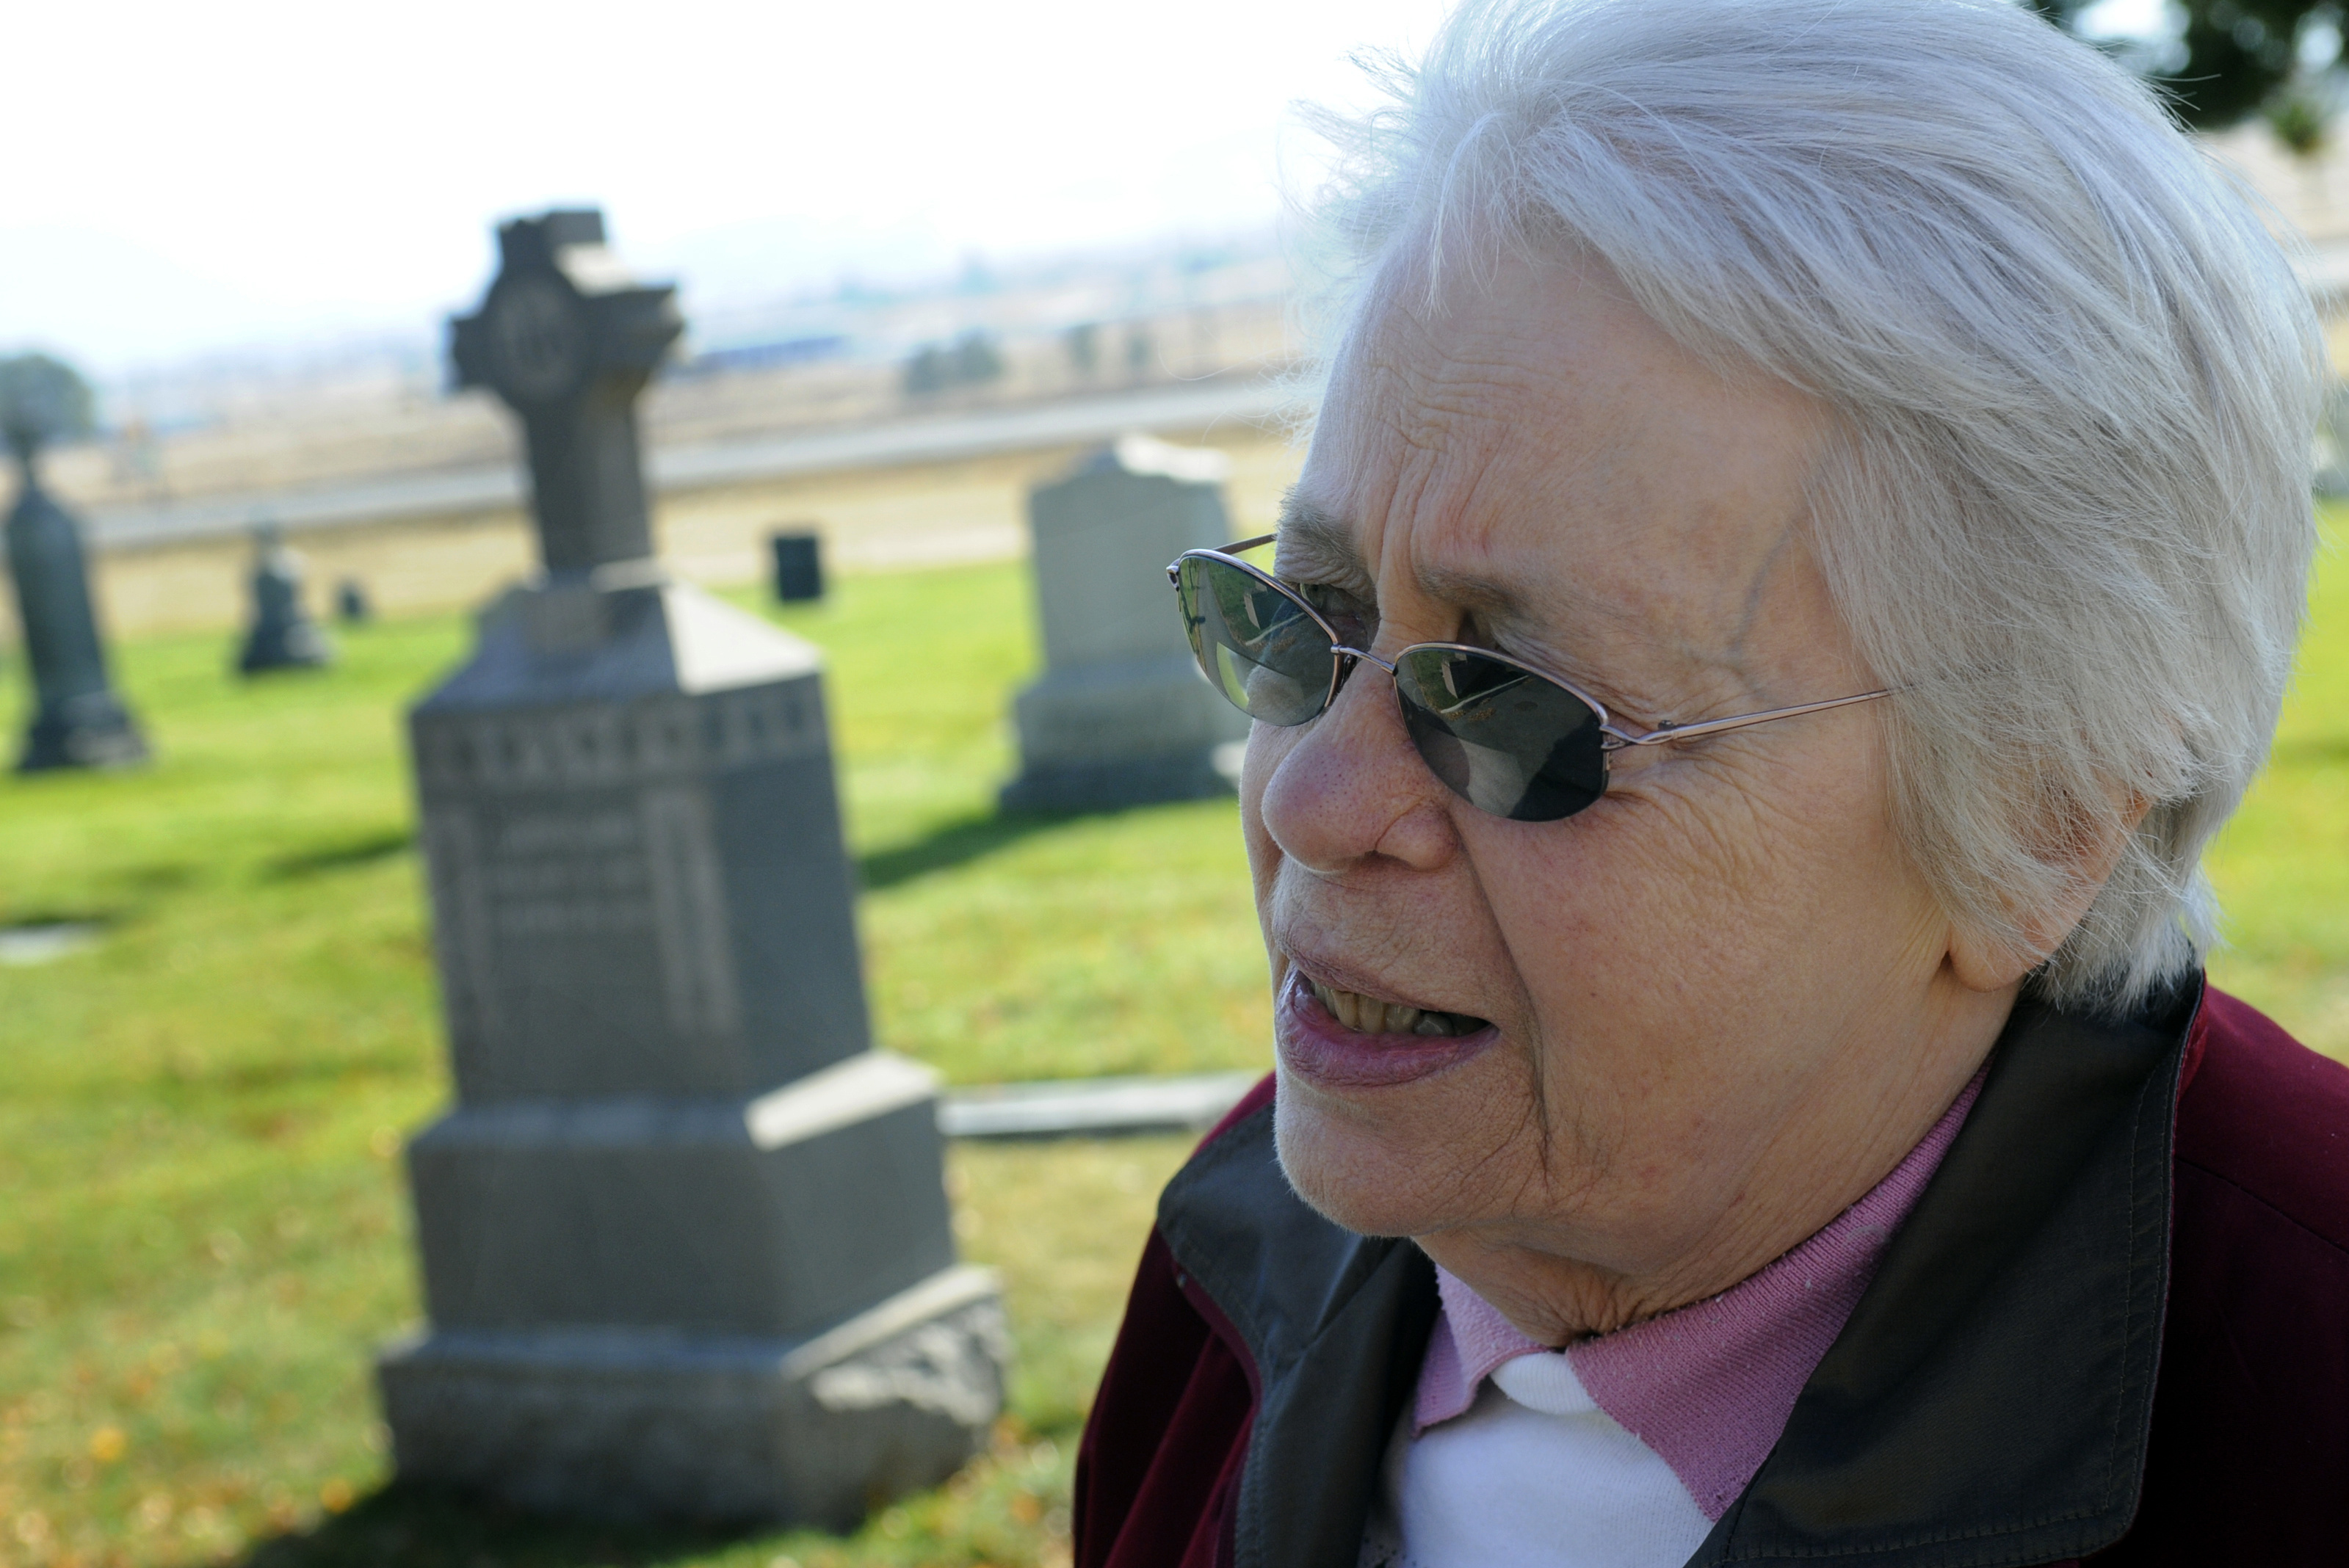 Event highlights cemeteries | The Spokesman-Review